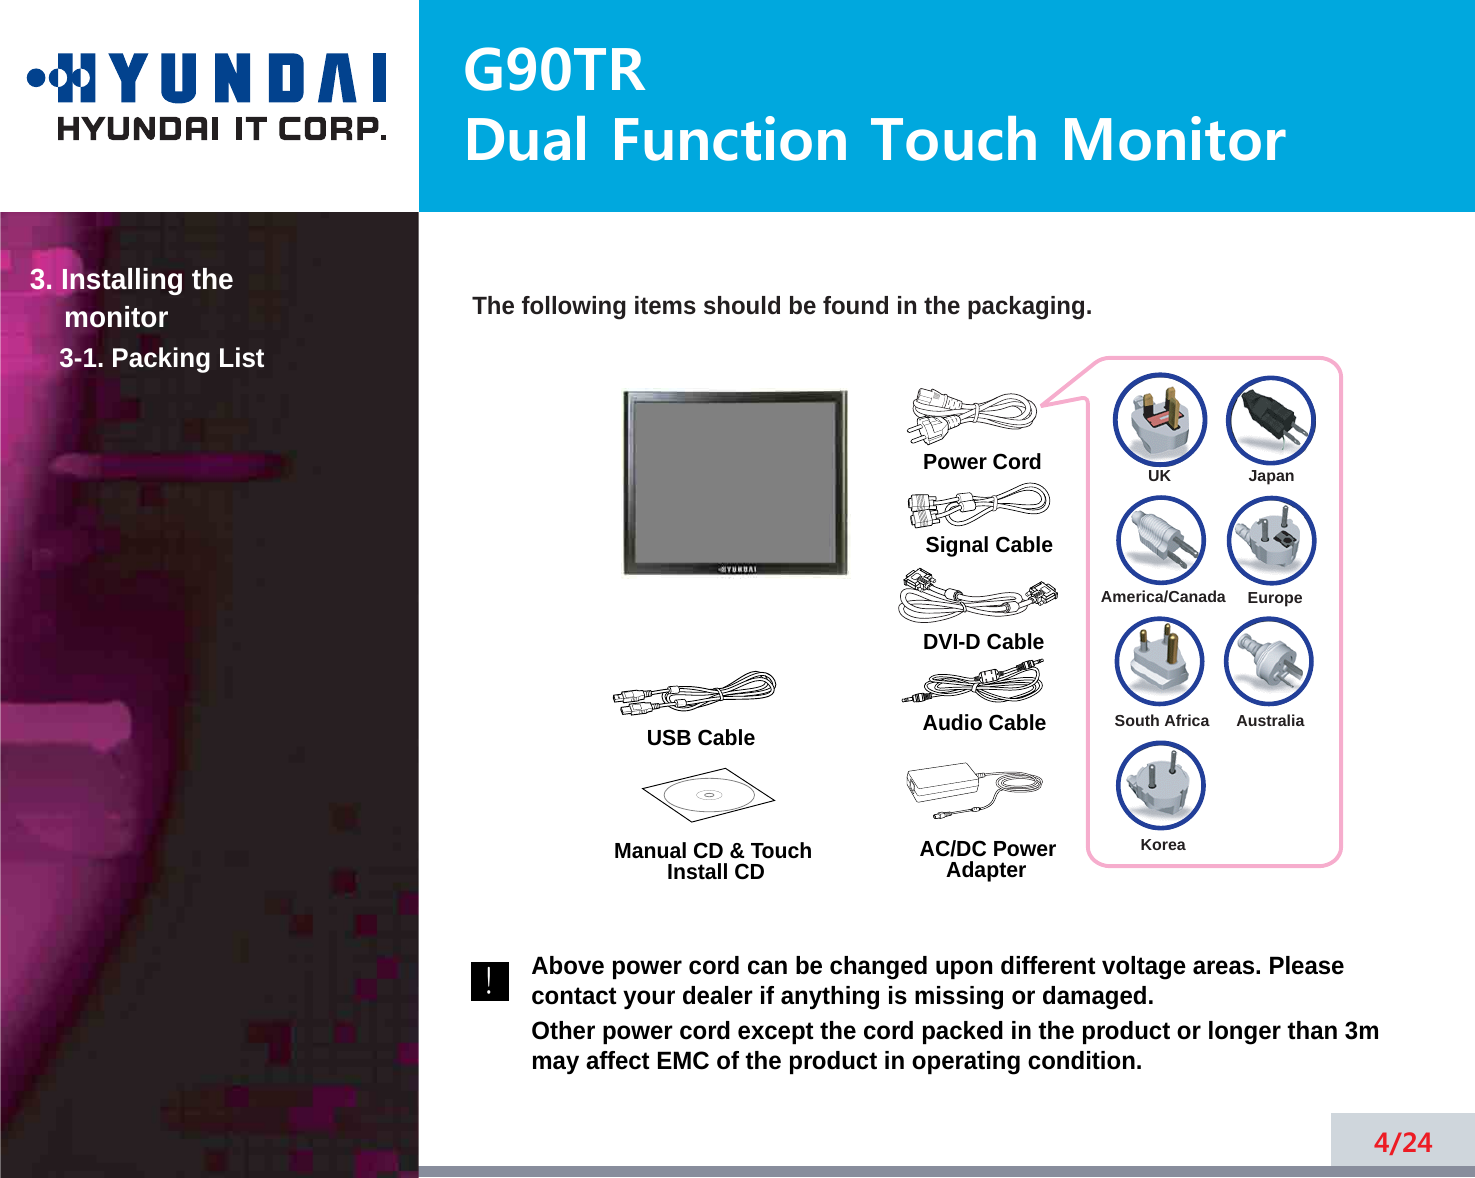 G90TRDual Function Touch Monitor4/24The following items should be found in the packaging.Above power cord can be changed upon different voltage areas. Pleasecontact your dealer if anything is missing or damaged.Other power cord except the cord packed in the product or longer than 3mmay affect EMC of the product in operating condition.3. Installing the monitor3-1. Packing List!UKAmerica/CanadaJapanAustraliaKoreaEuropeSouth AfricaPower CordSignal CableAudio CableDVI-D CableUSB Cable Manual CD &amp; Touch Install CD AC/DC PowerAdapter